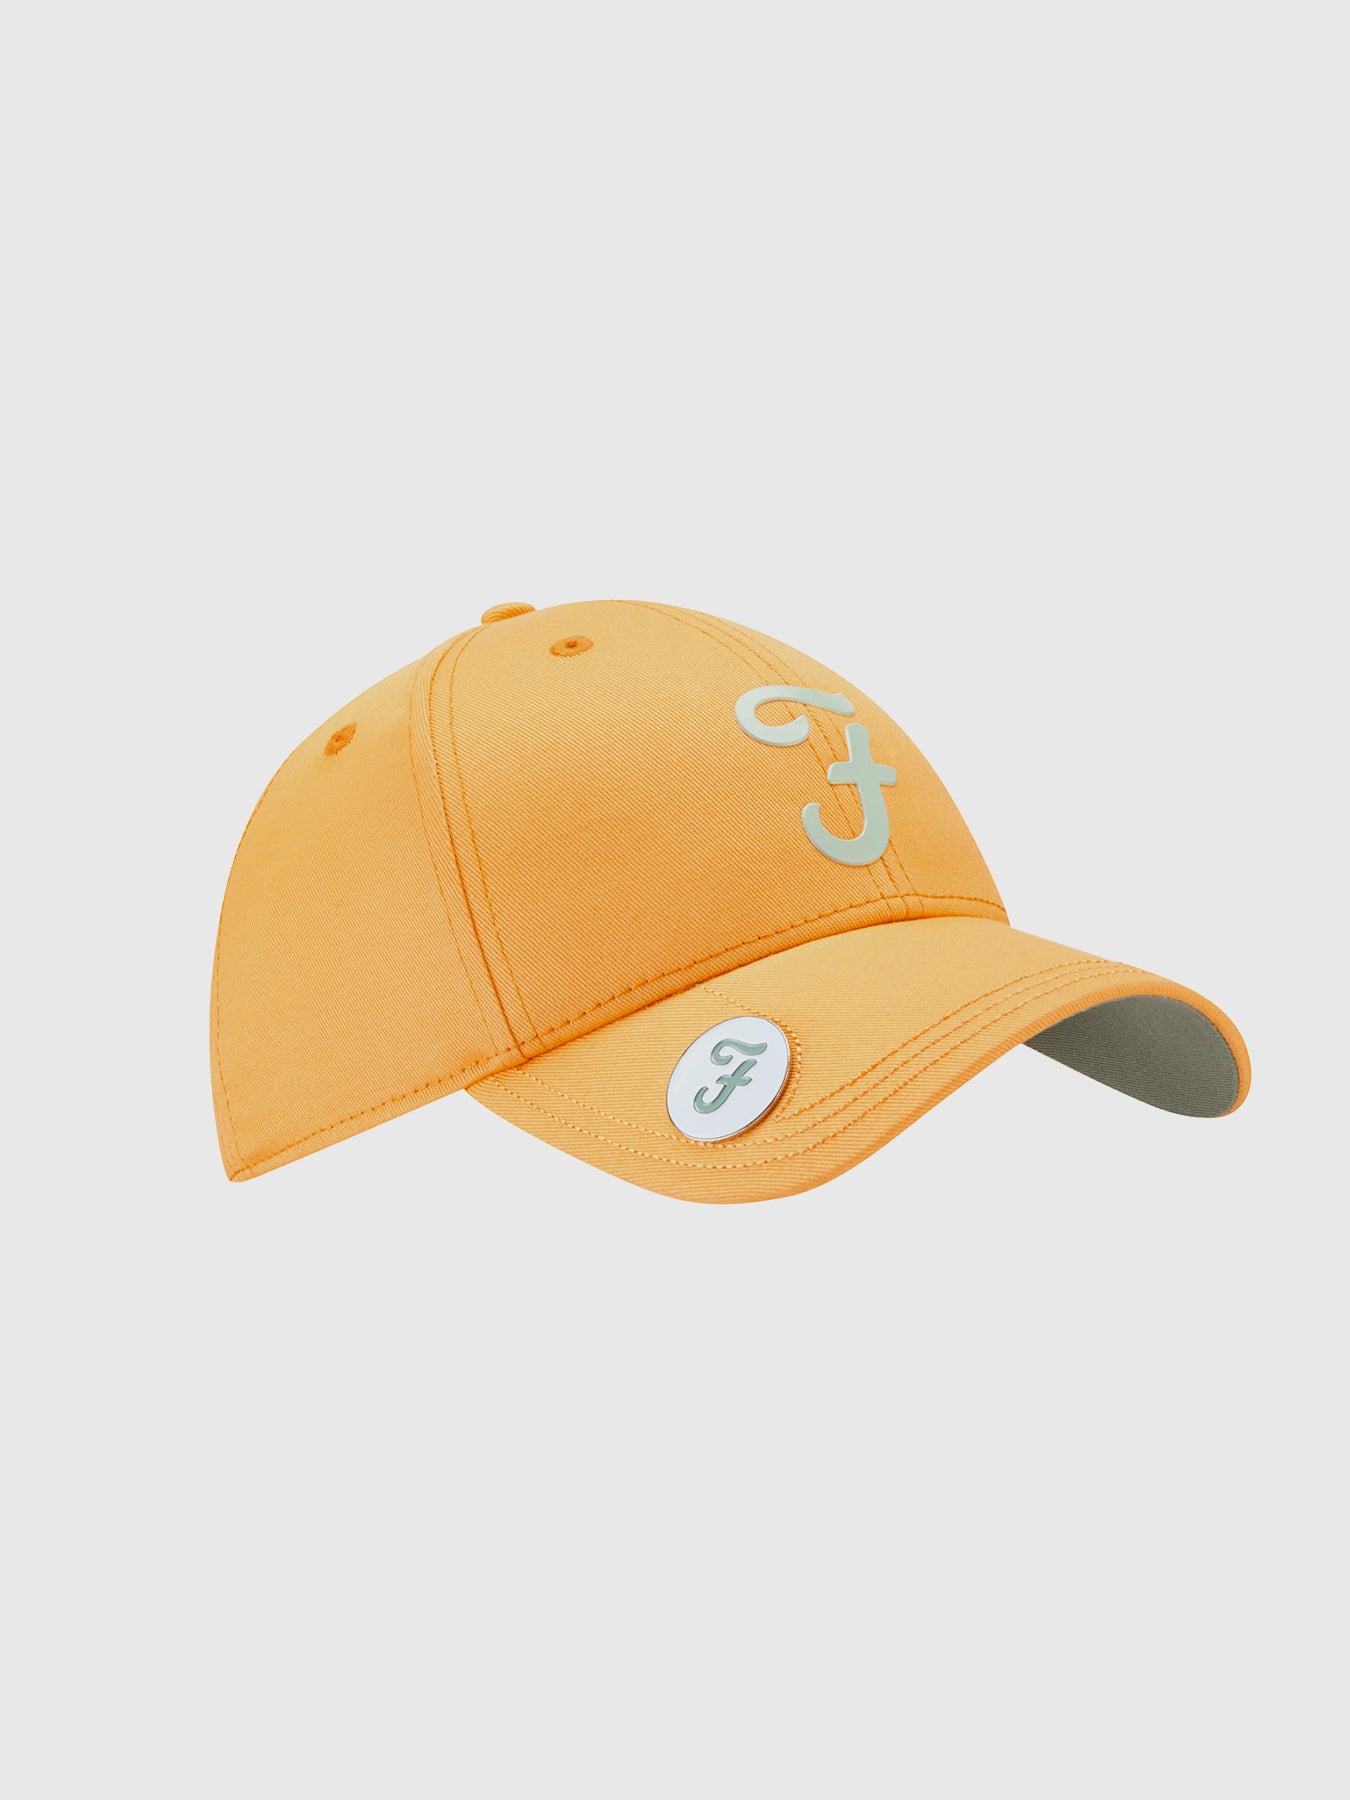 View Reno Golf Cap With Ball Marker In Apricot information